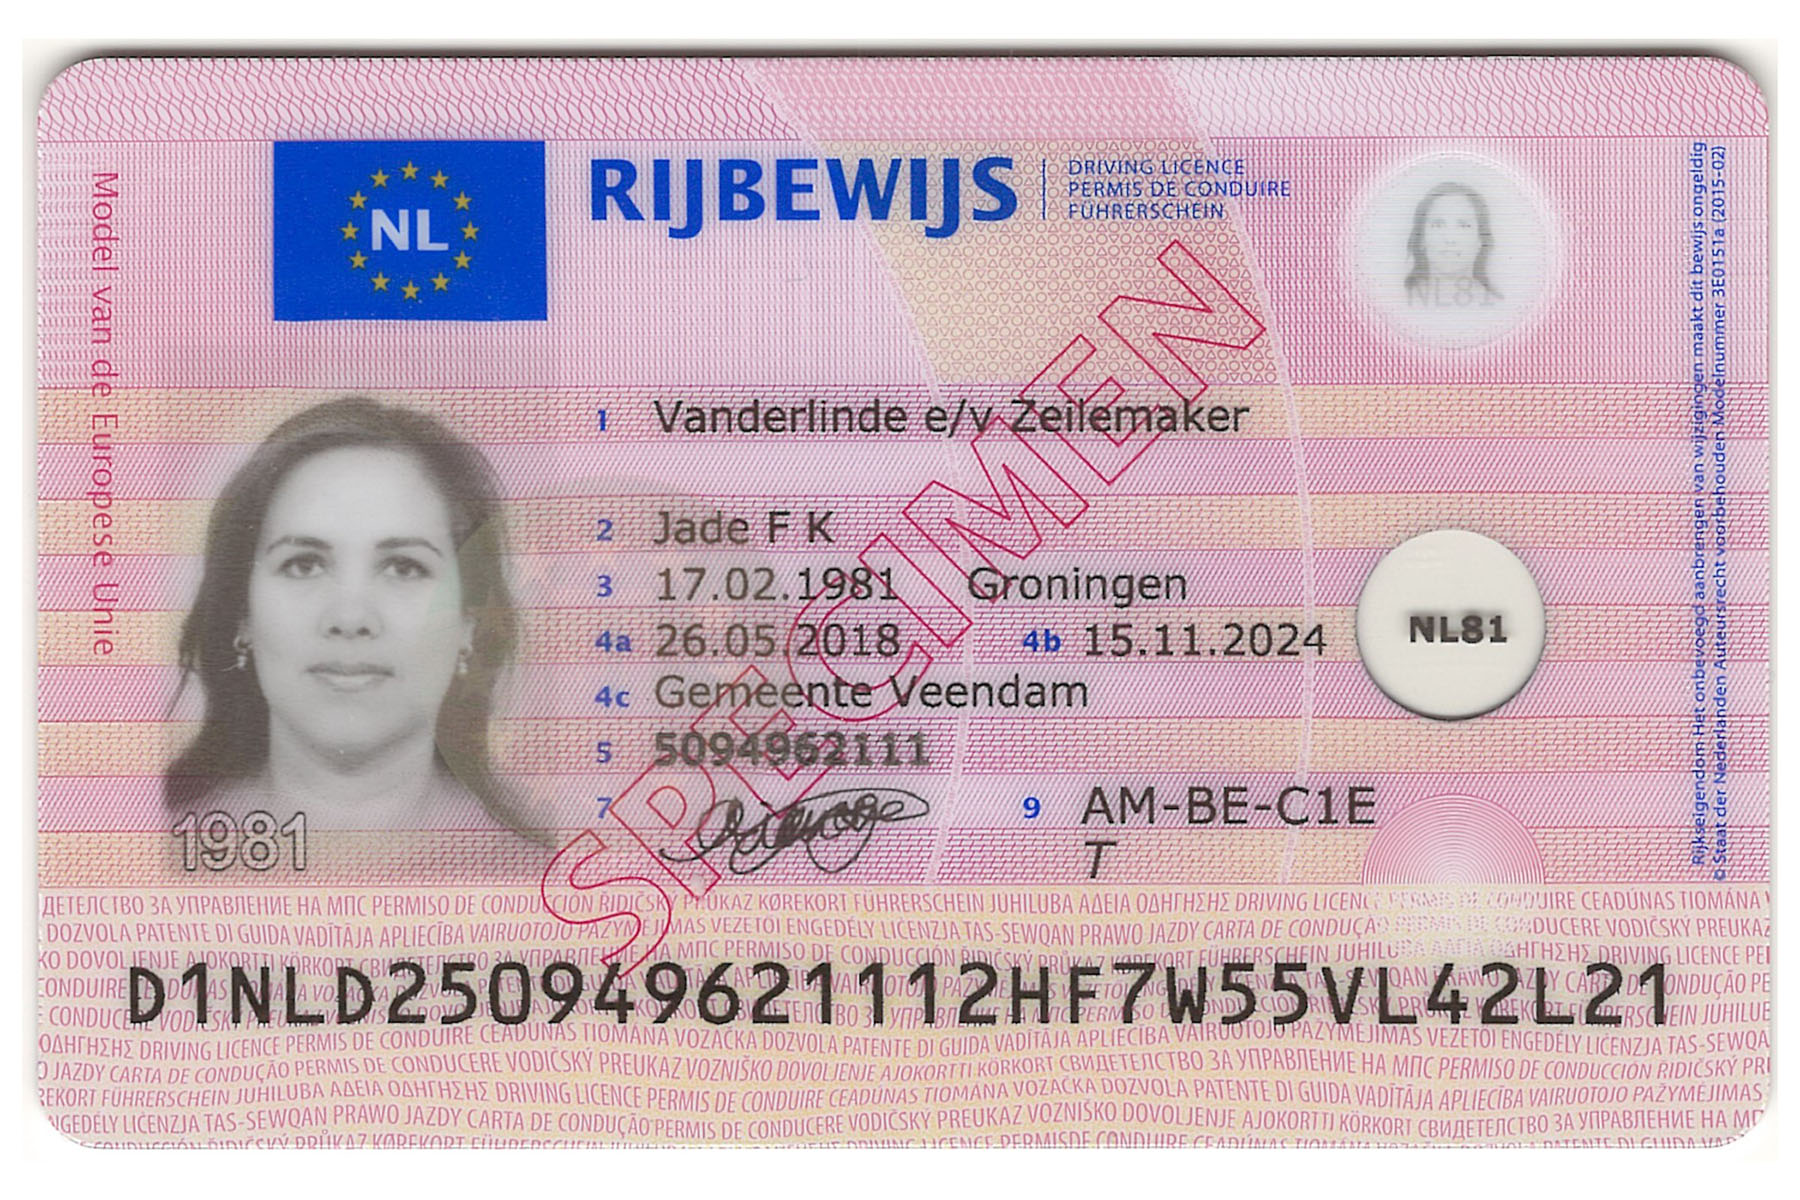 Example of a driving license in the Netherlands